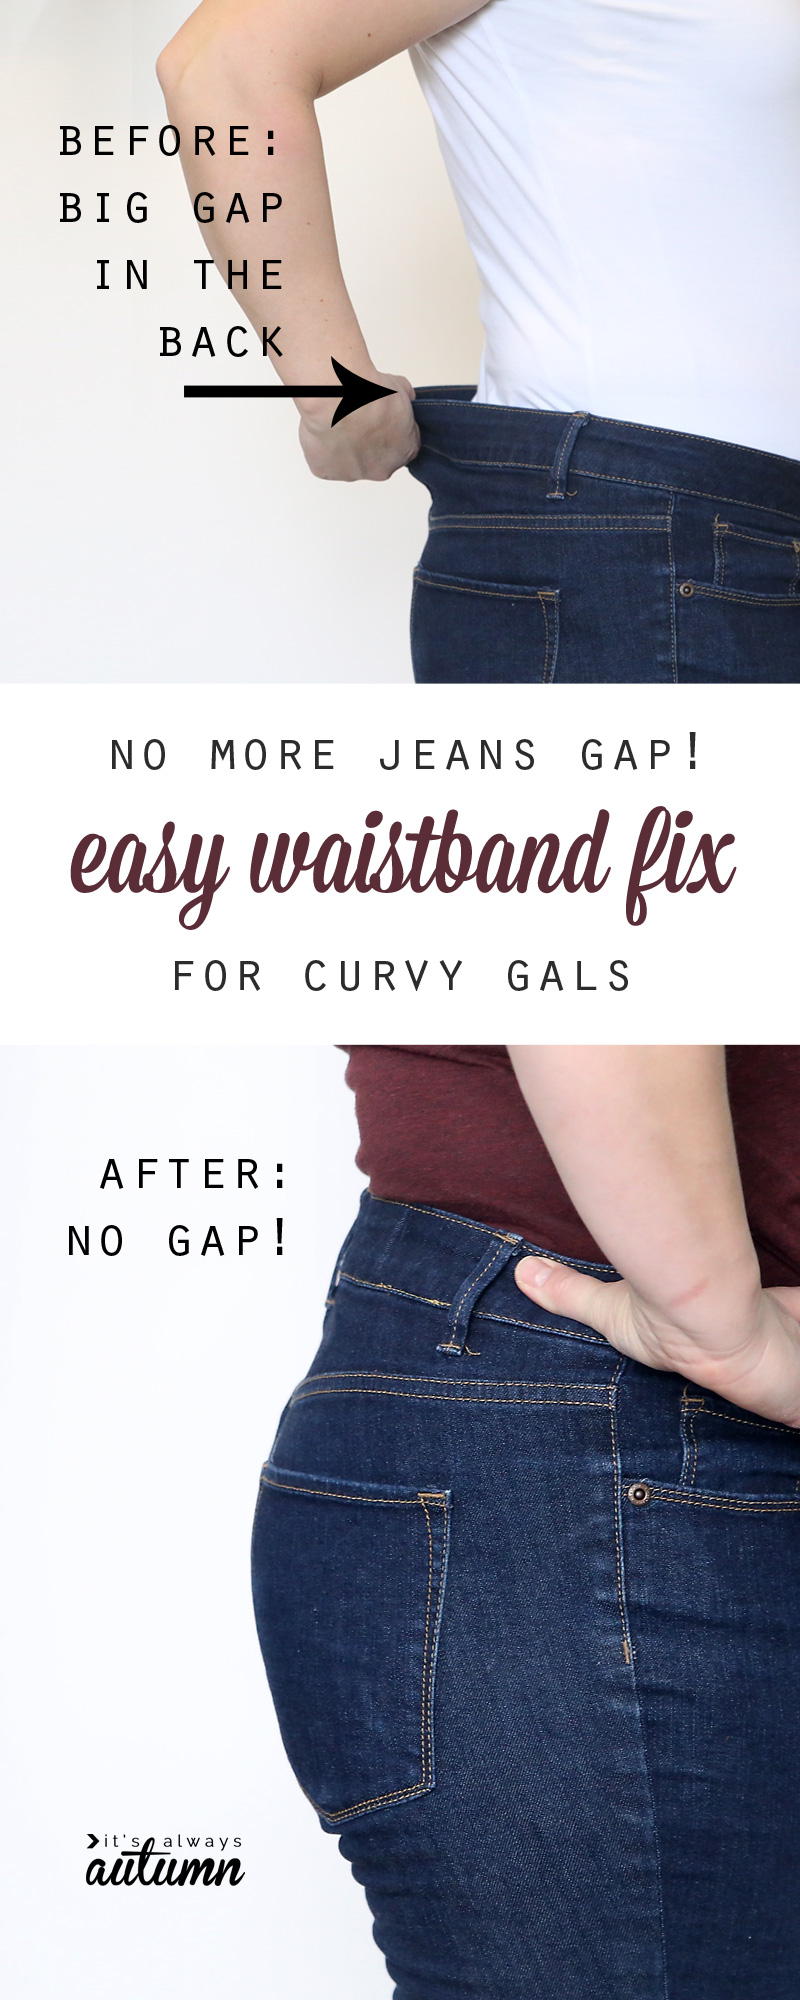 Swap Out an Elastic Waist Band - Simple Alteration Tutorial for Beginners 